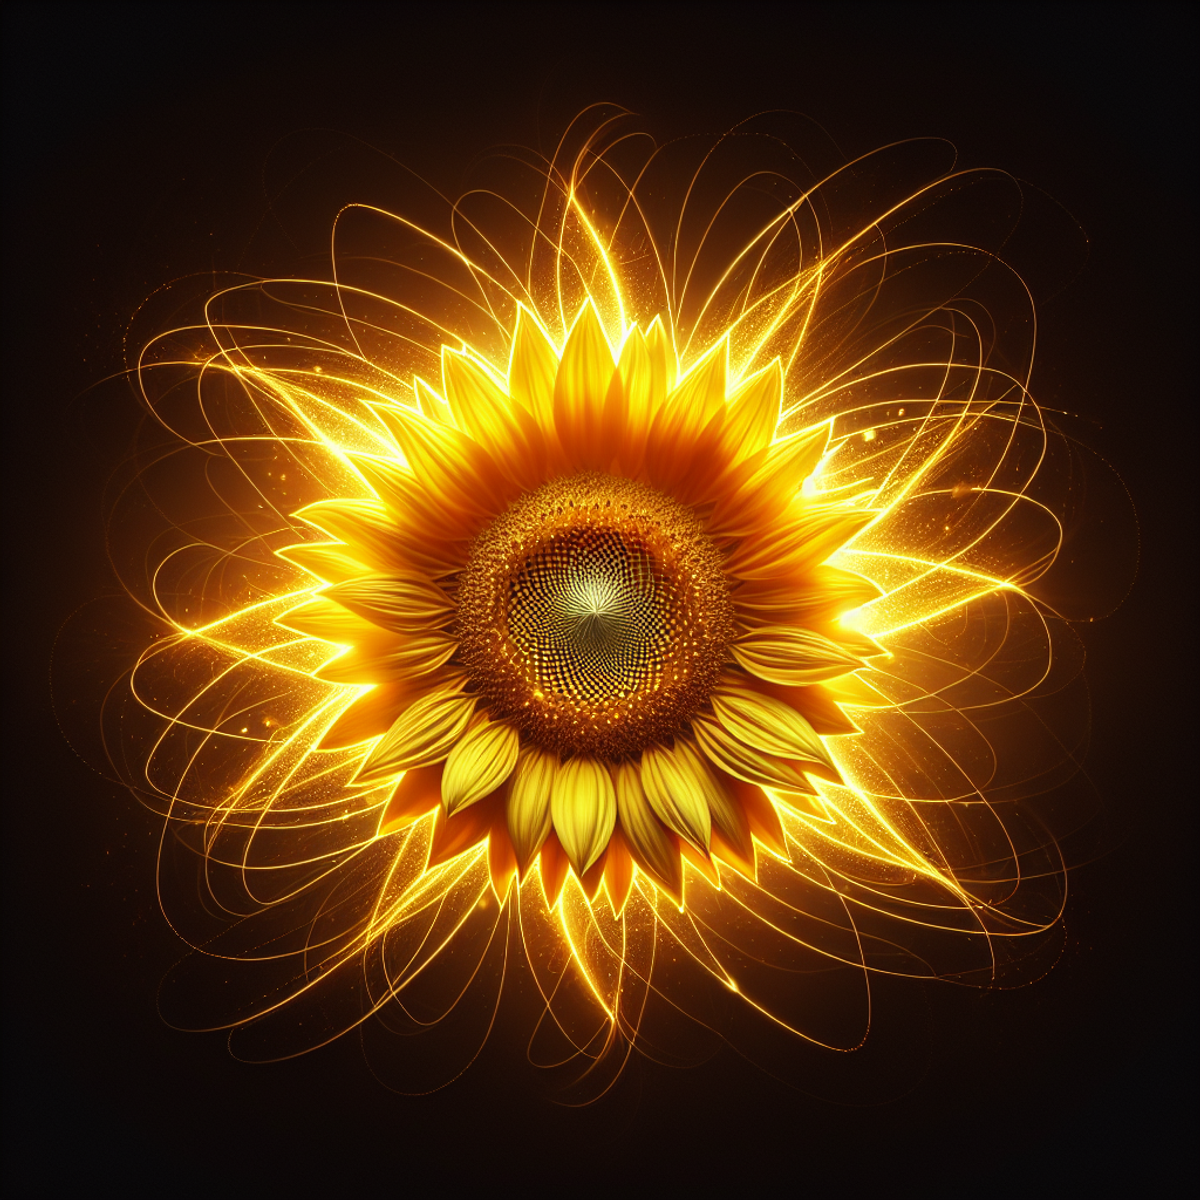 A vibrant sunflower in full bloom, emanating glowing light and a halo of radiance.